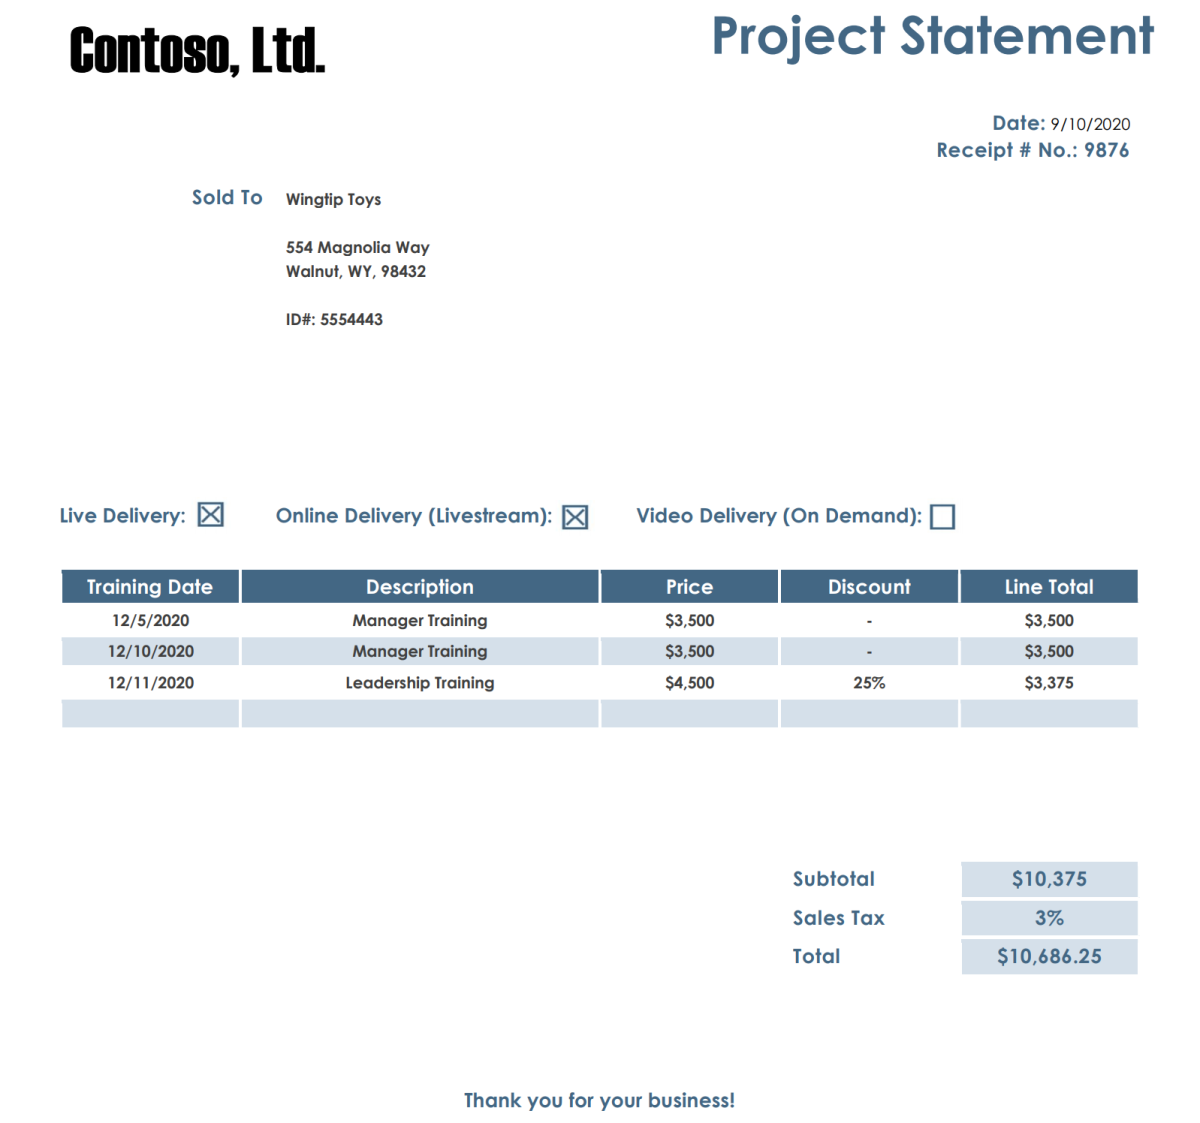 Contoso project statement document with a table.